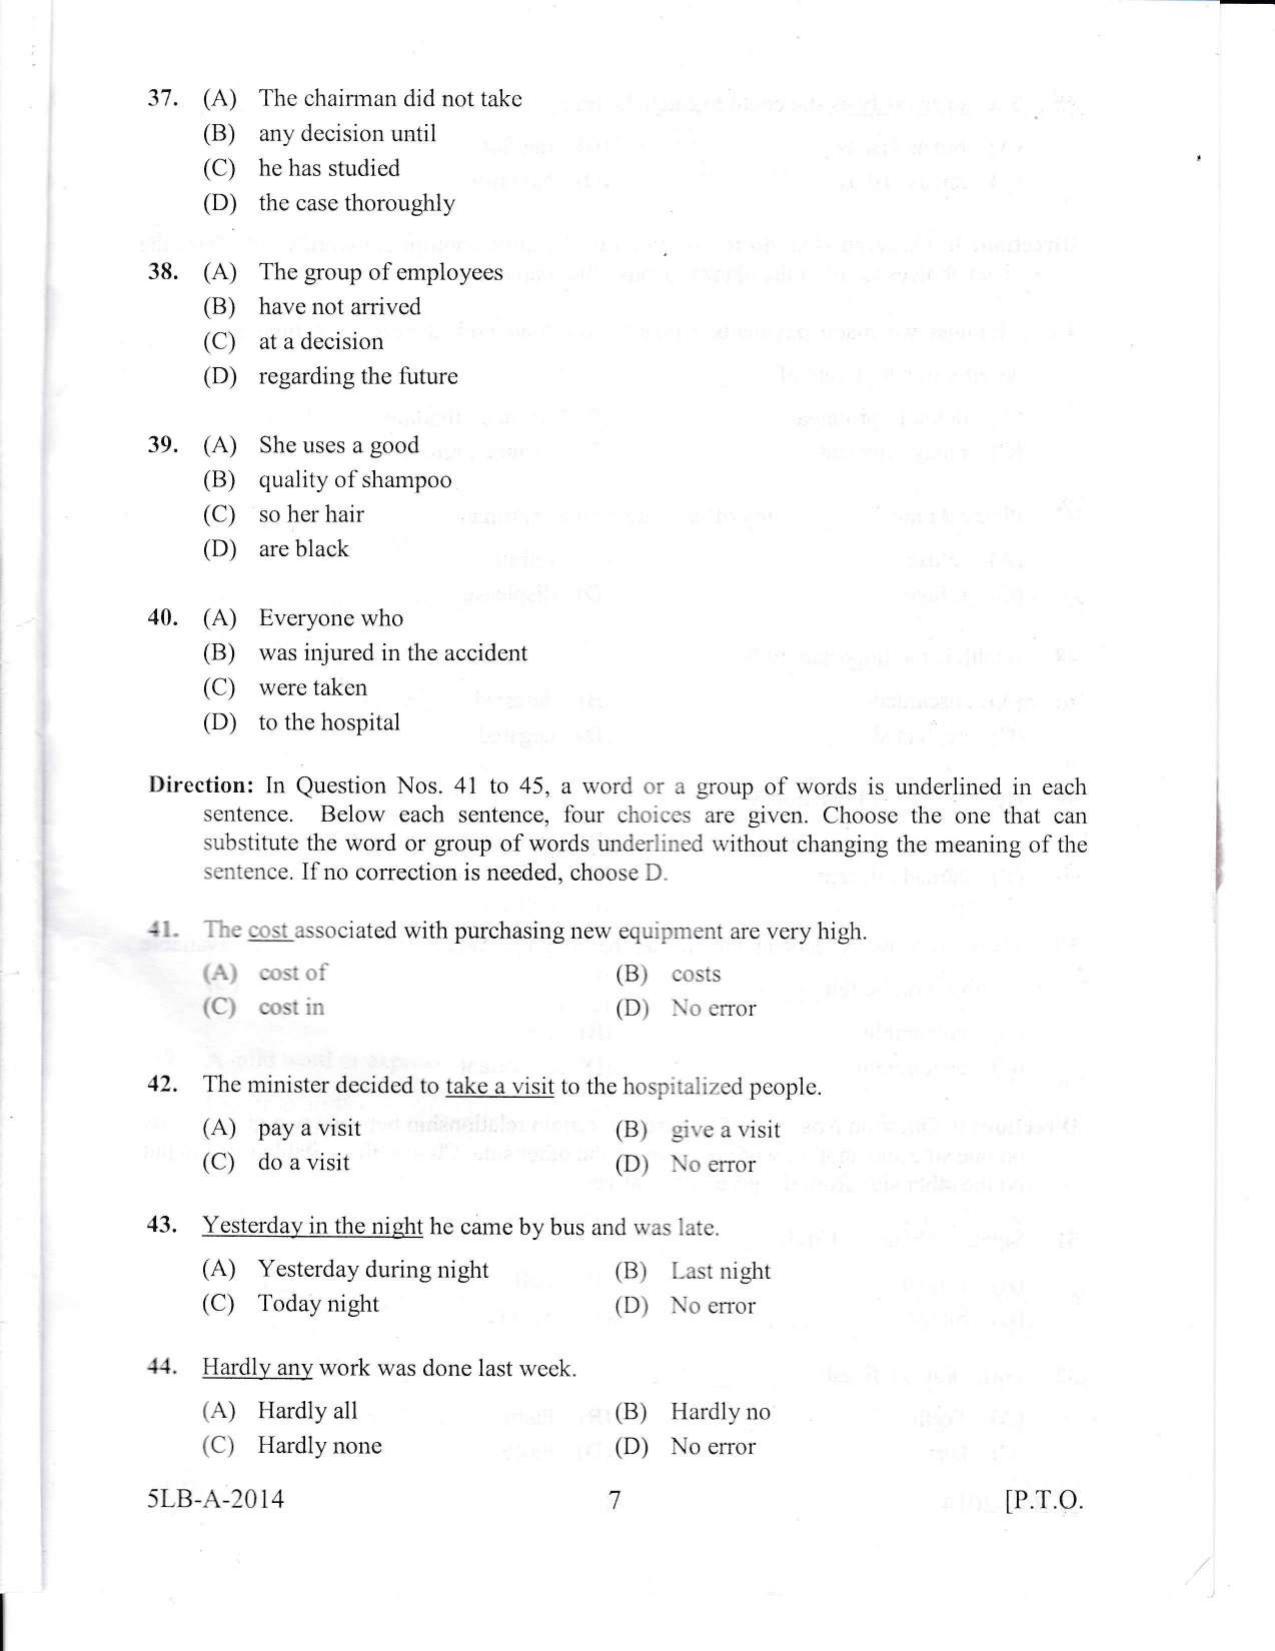 KLEE 5 Year LLB Exam 2014 Question Paper - Page 7